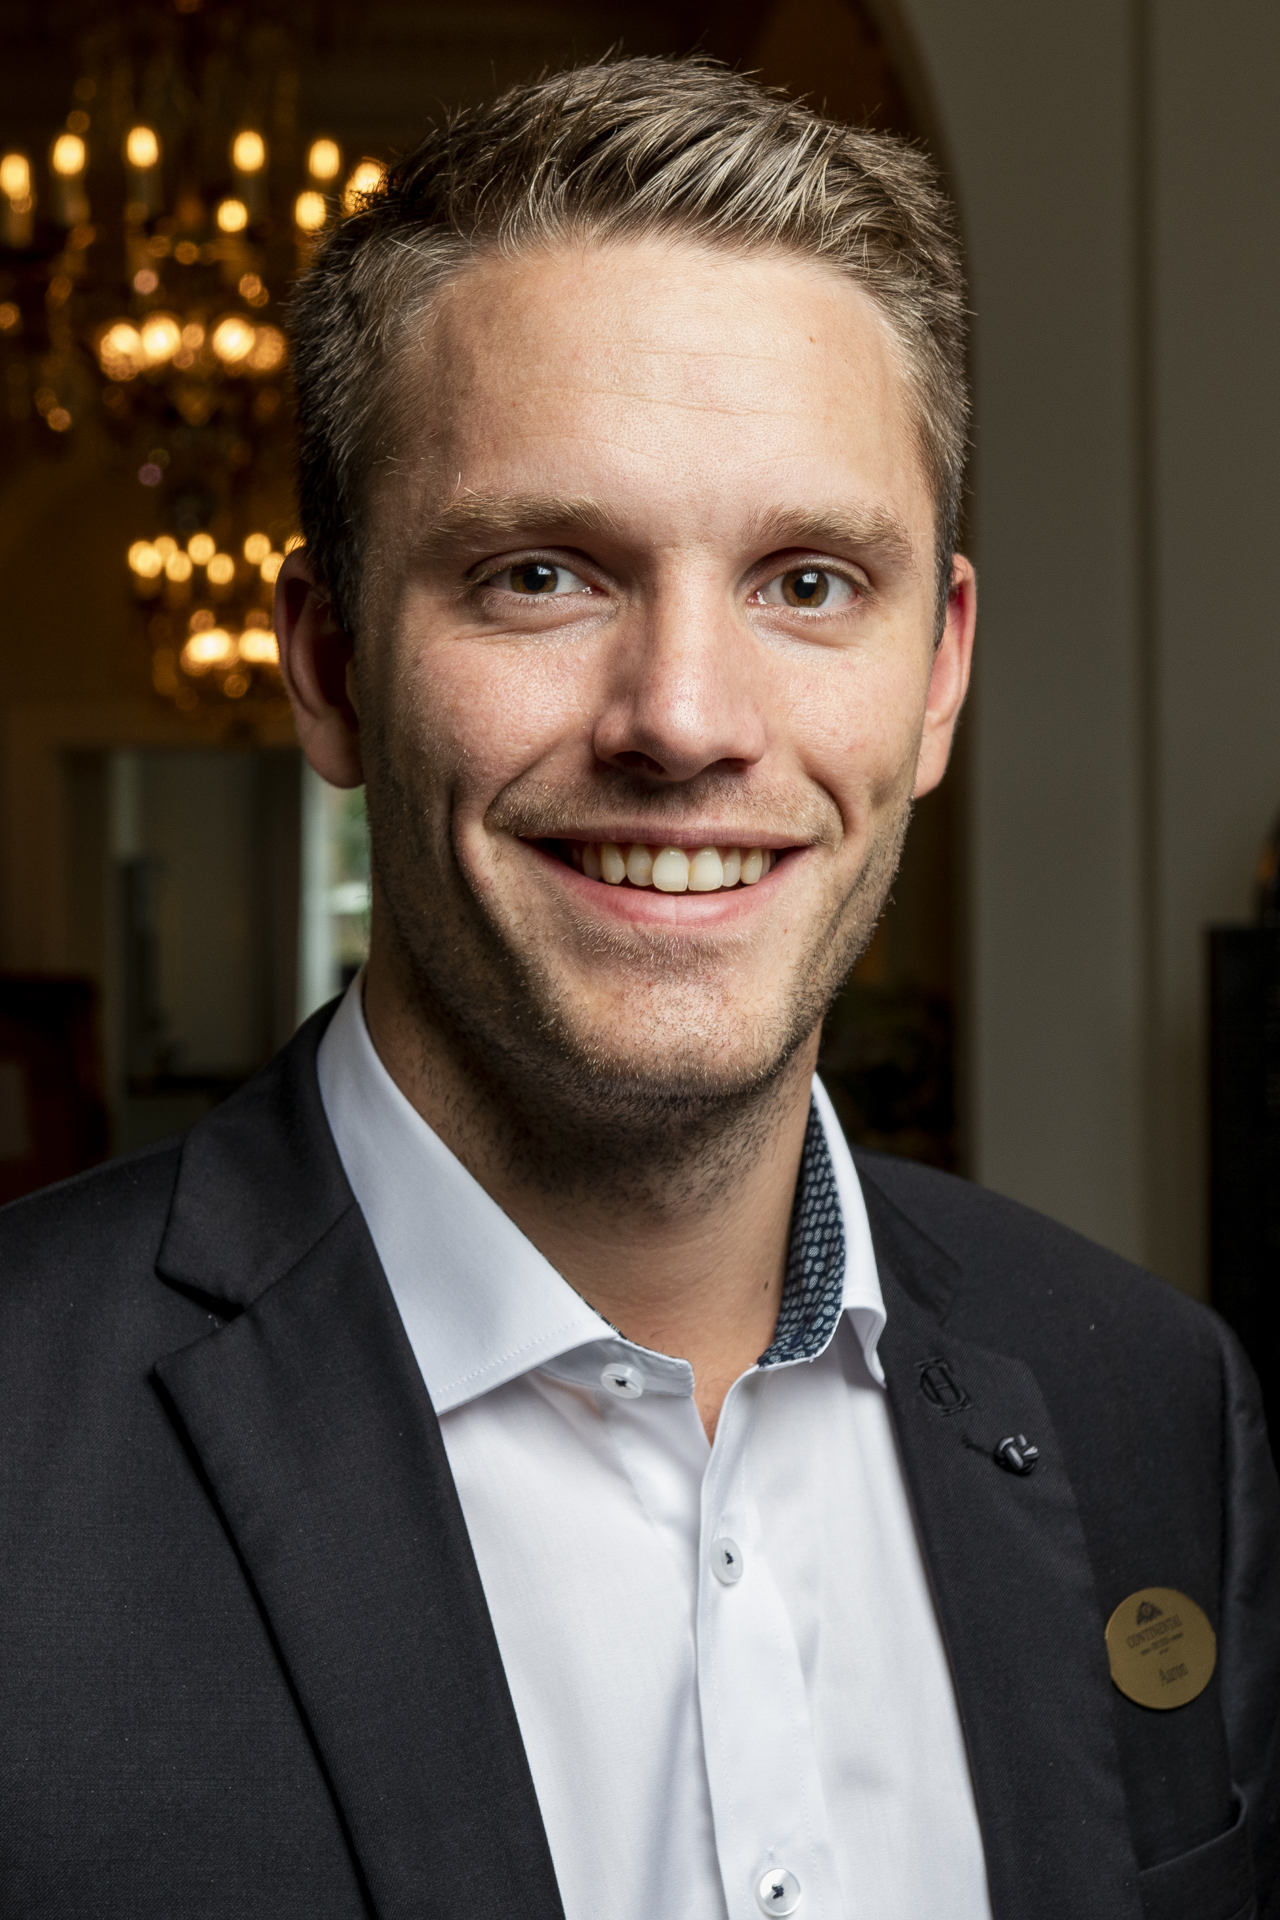 Aaron Persson